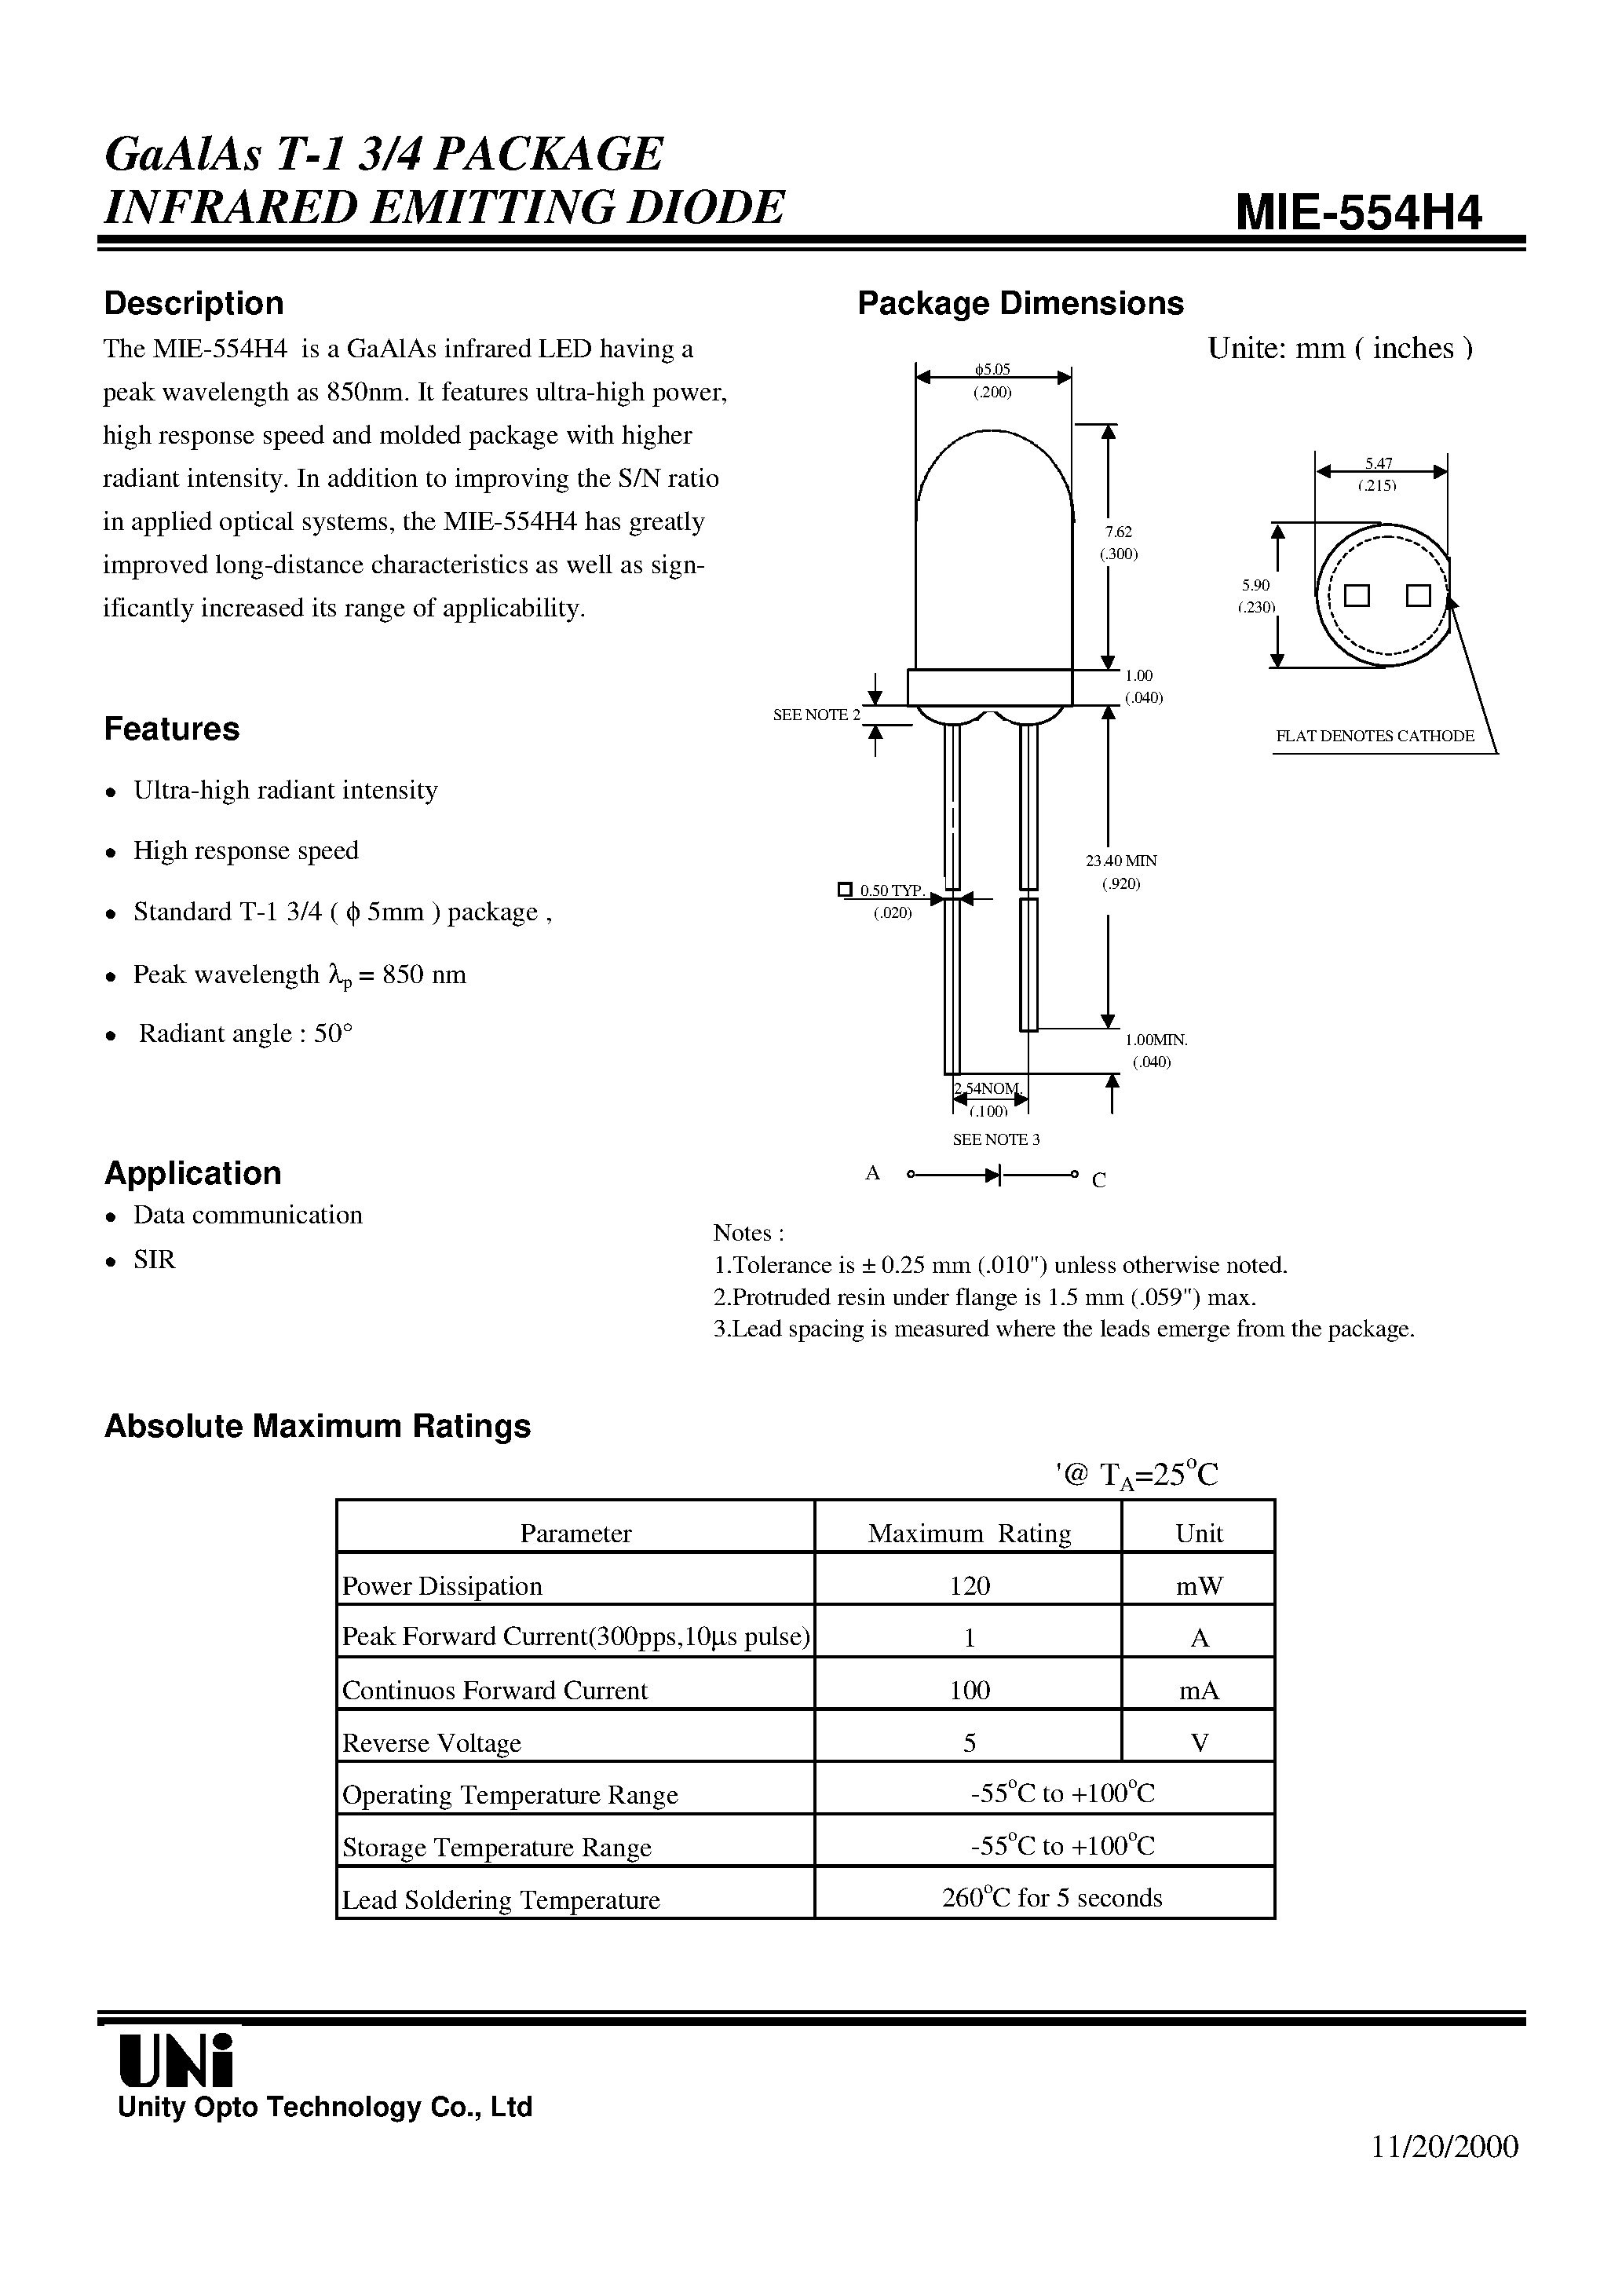 Datasheet MIE-554H4 - GaAlAs T-1 3/4 PACKAGE INFRARED EMITTING DIODE page 1